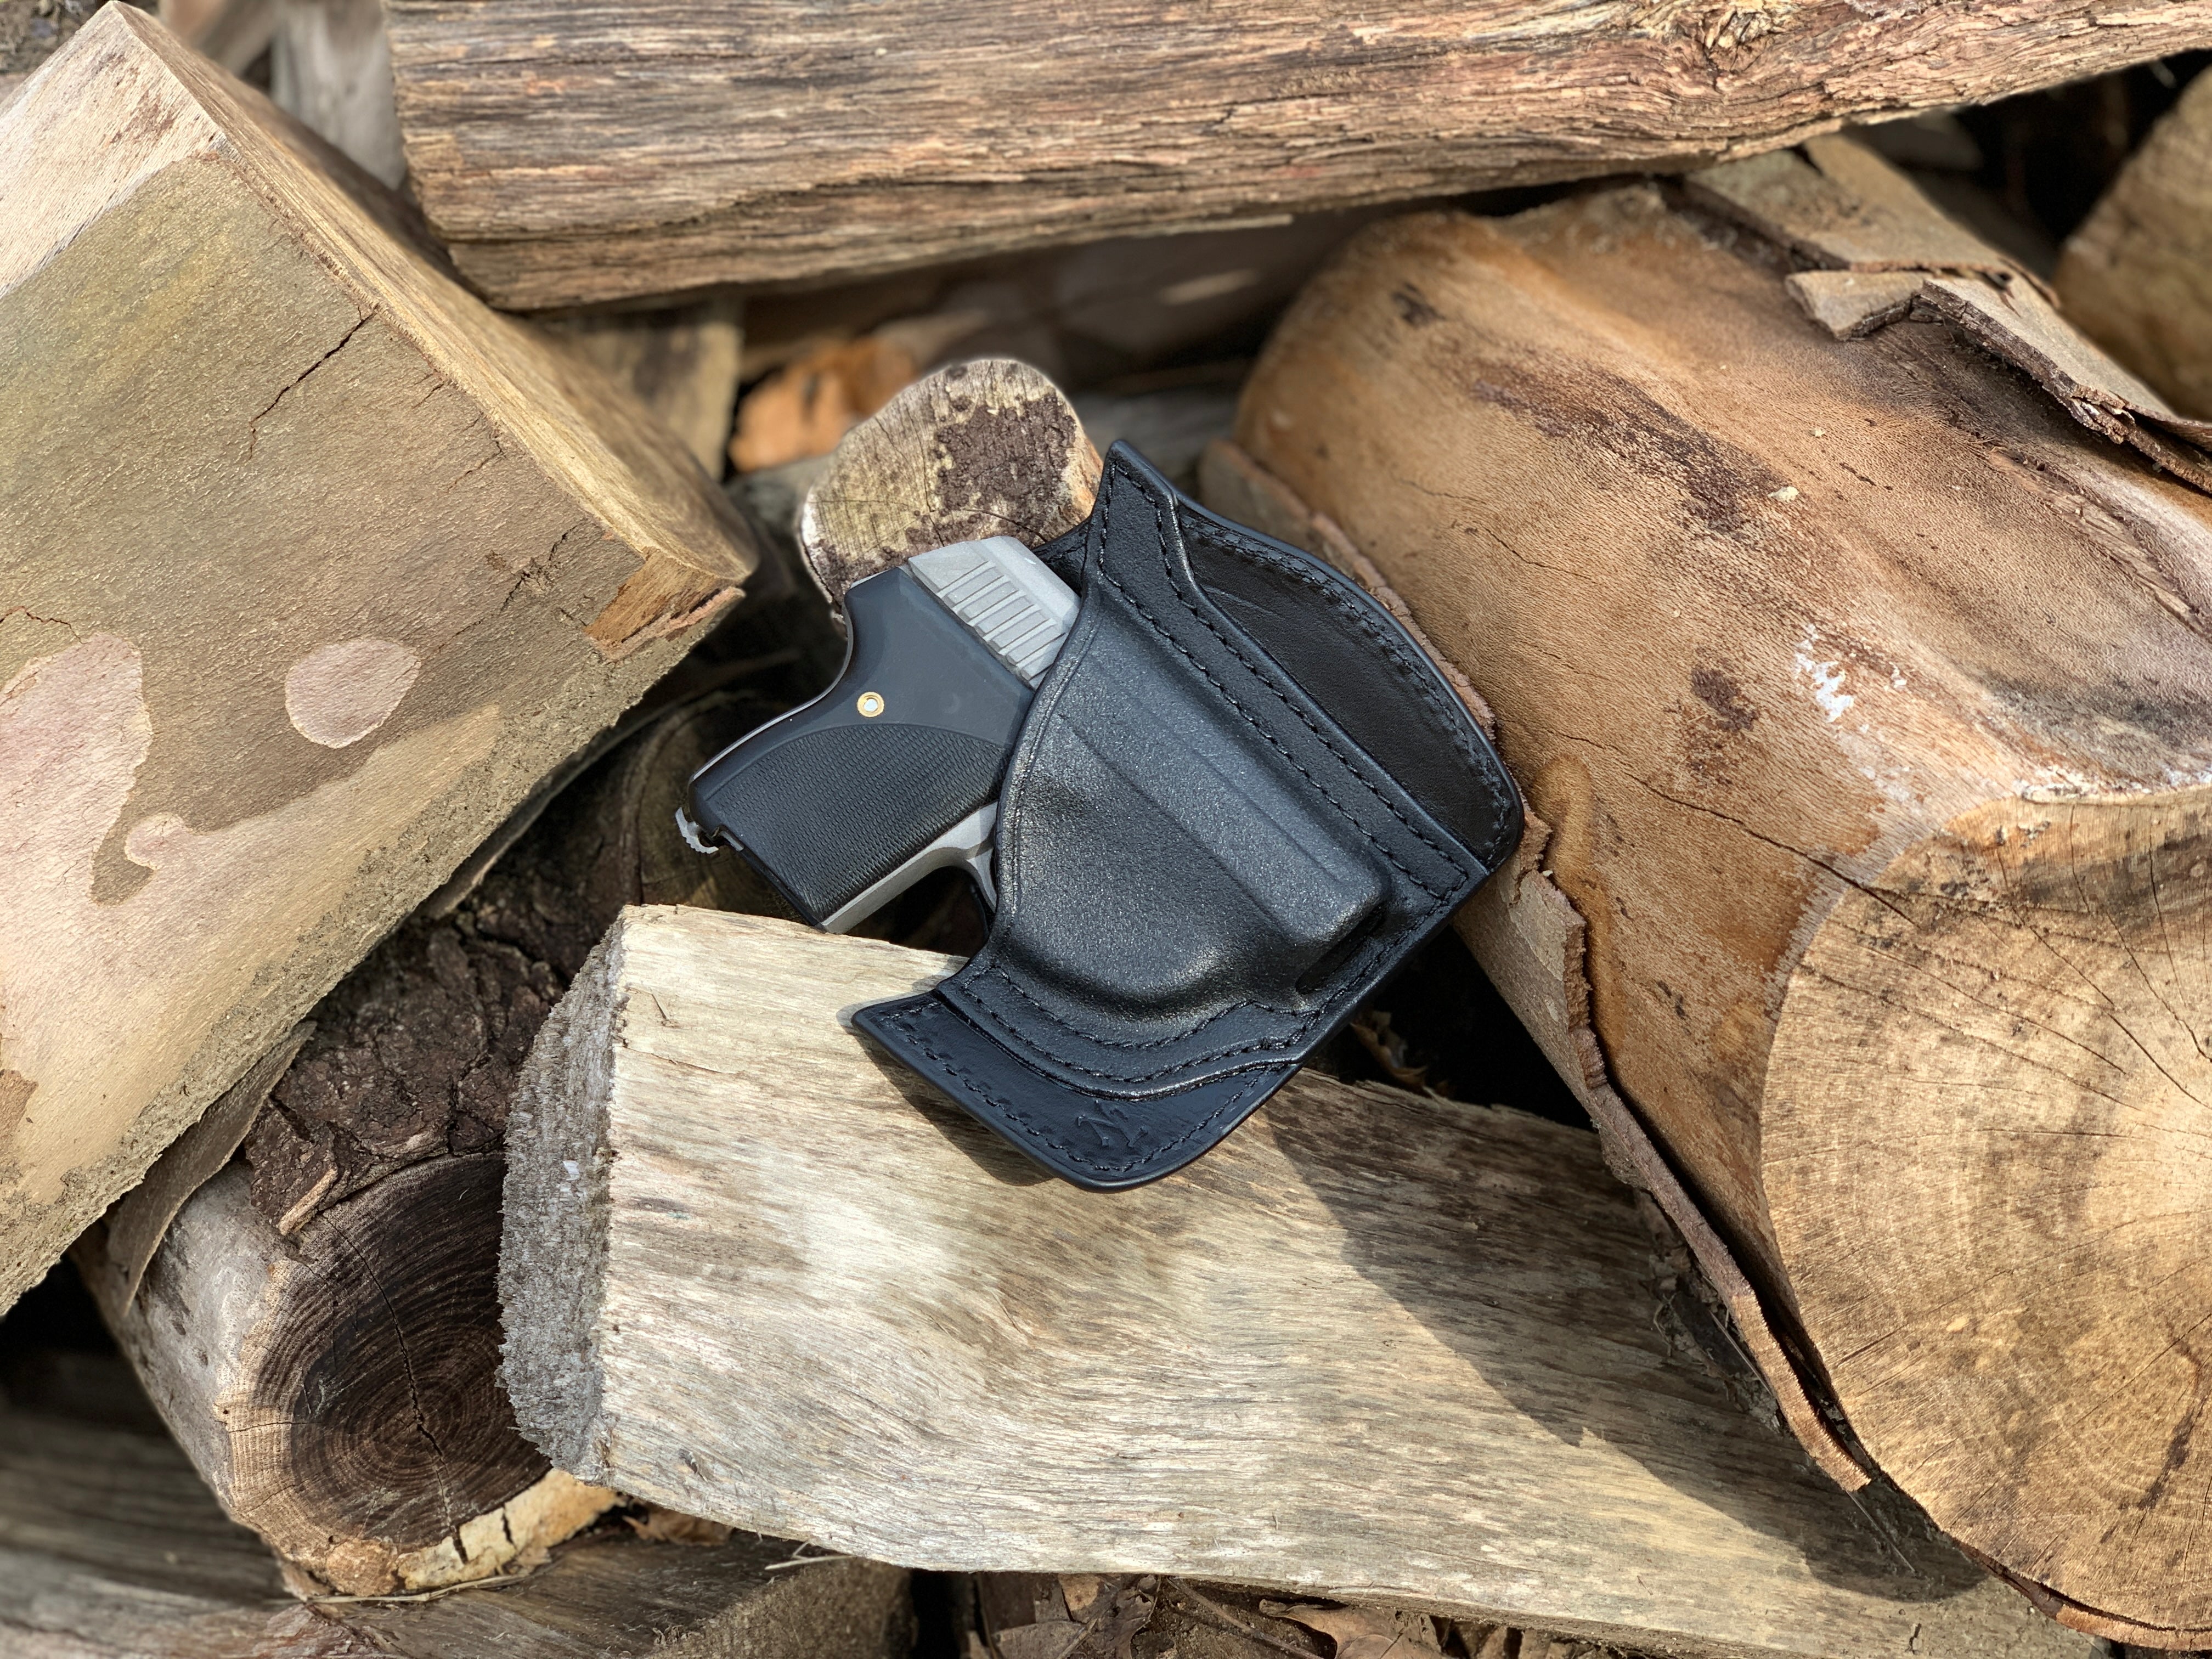 THE BEST POCKET HOLSTER FOR THE RUGER SECURITY 9 COMPACT